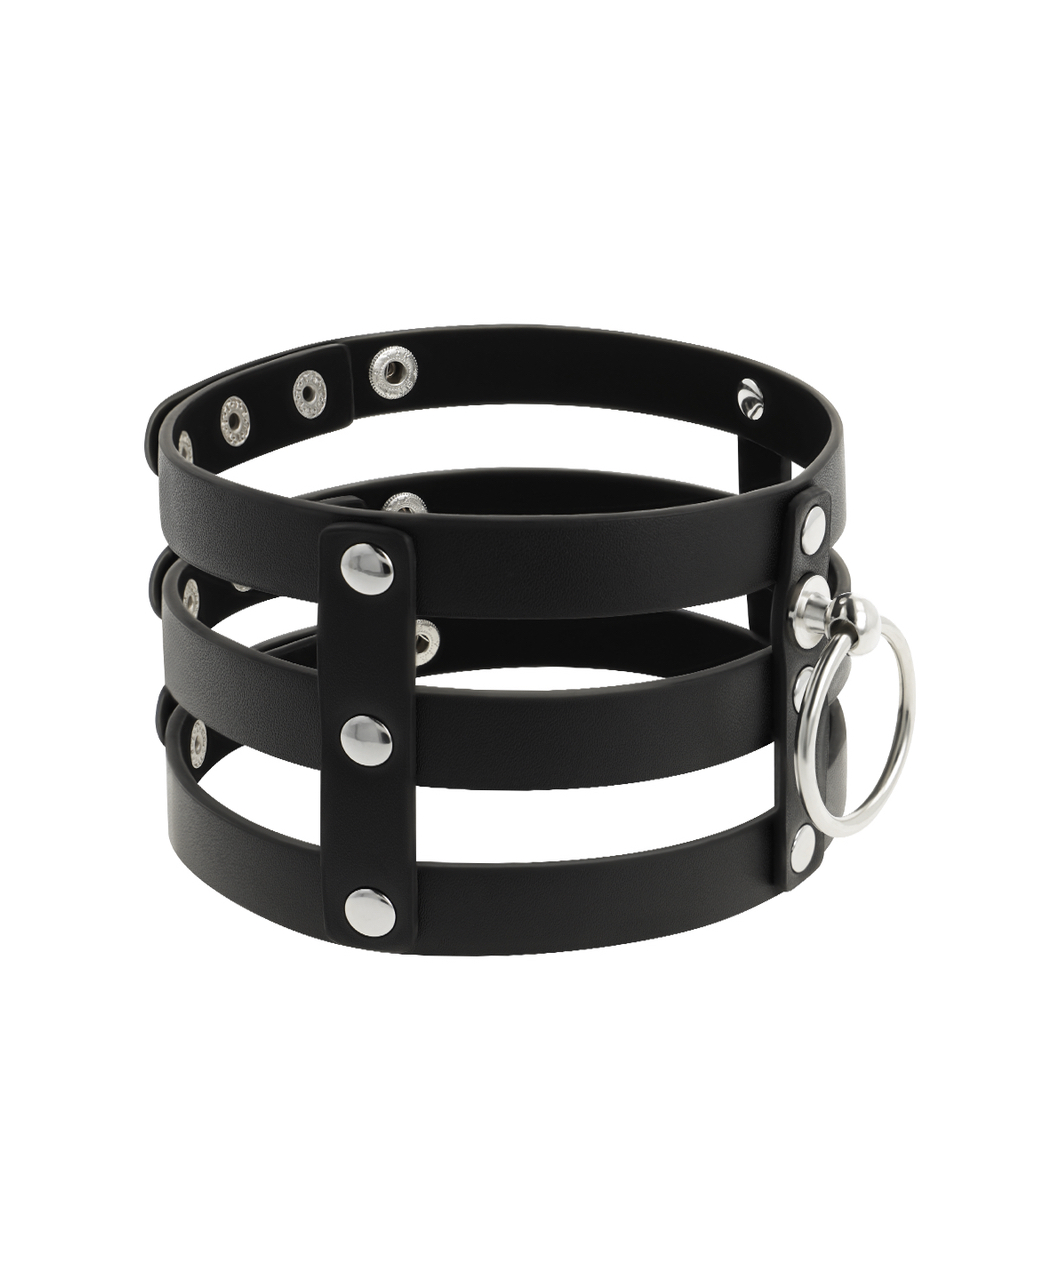 Coquette black leatherette cage choker with ring